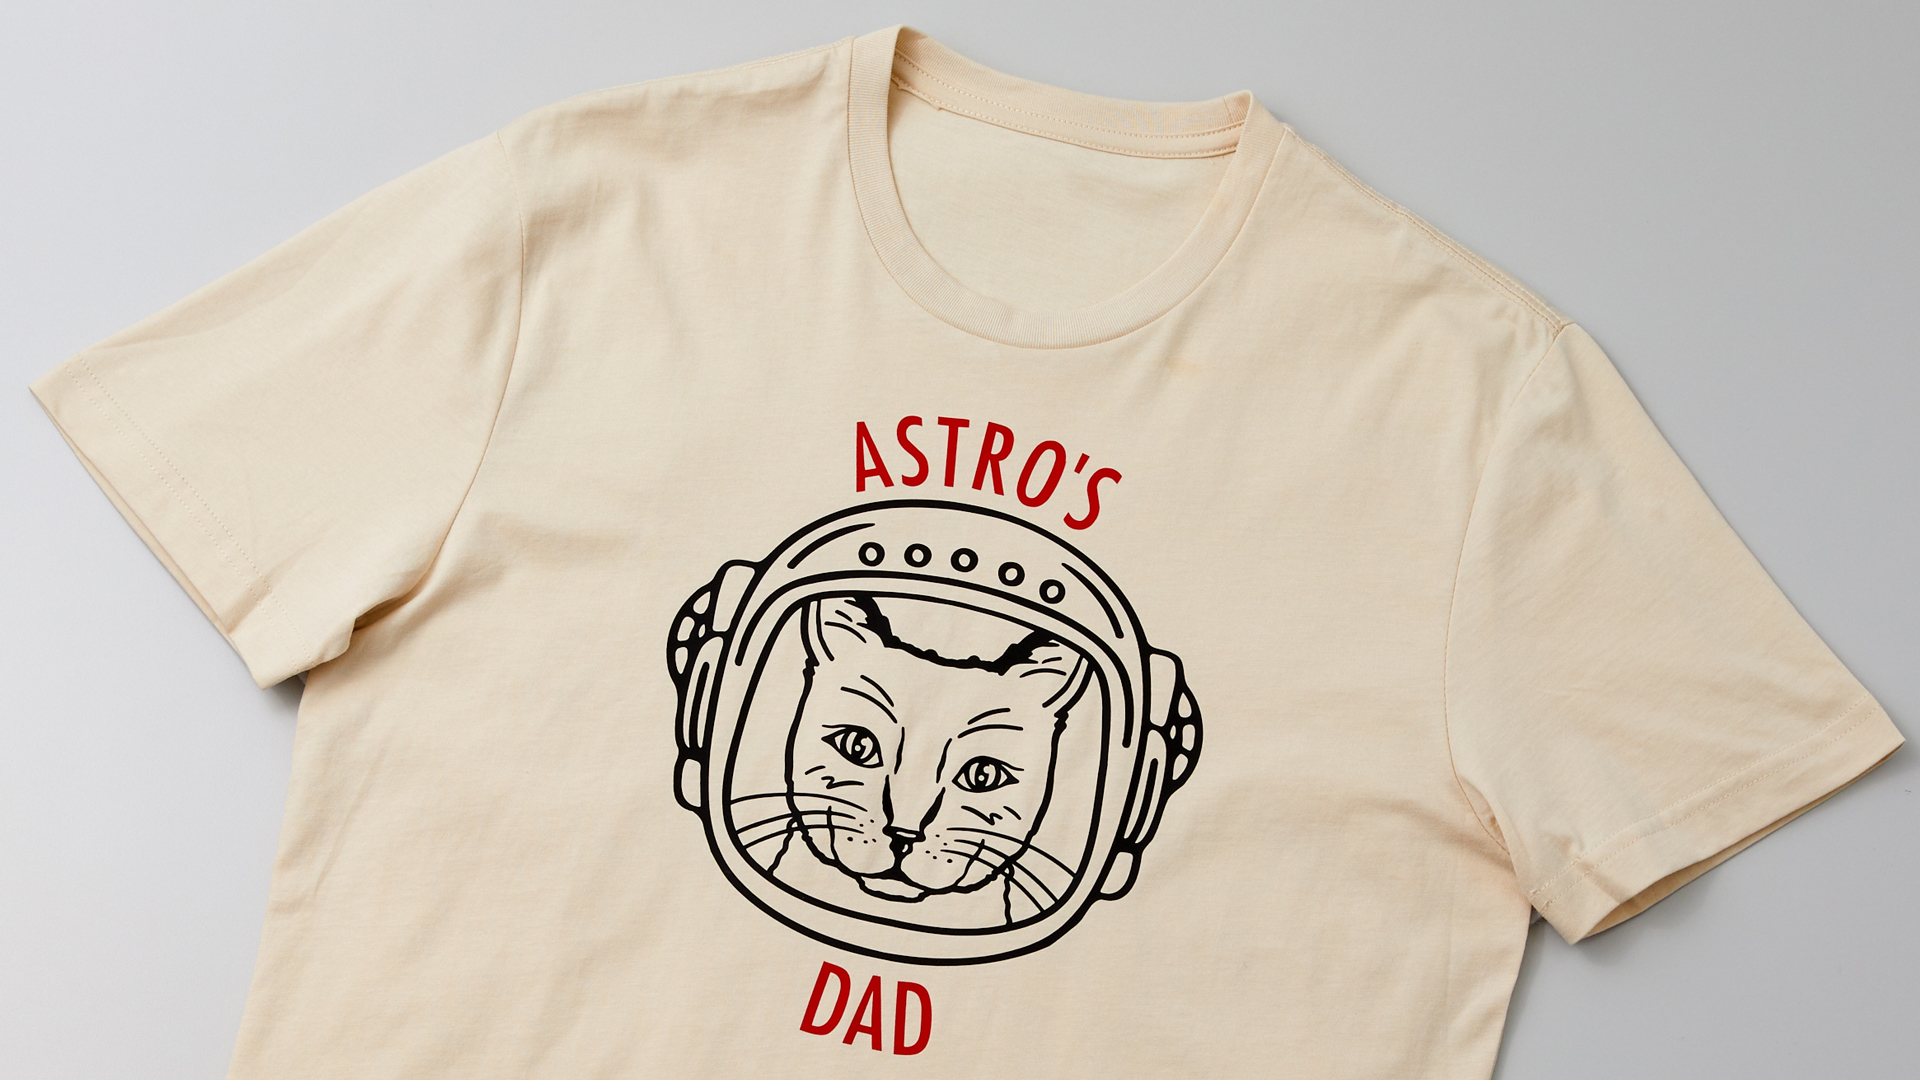 Personalized t-shirt for Astro's Dad design